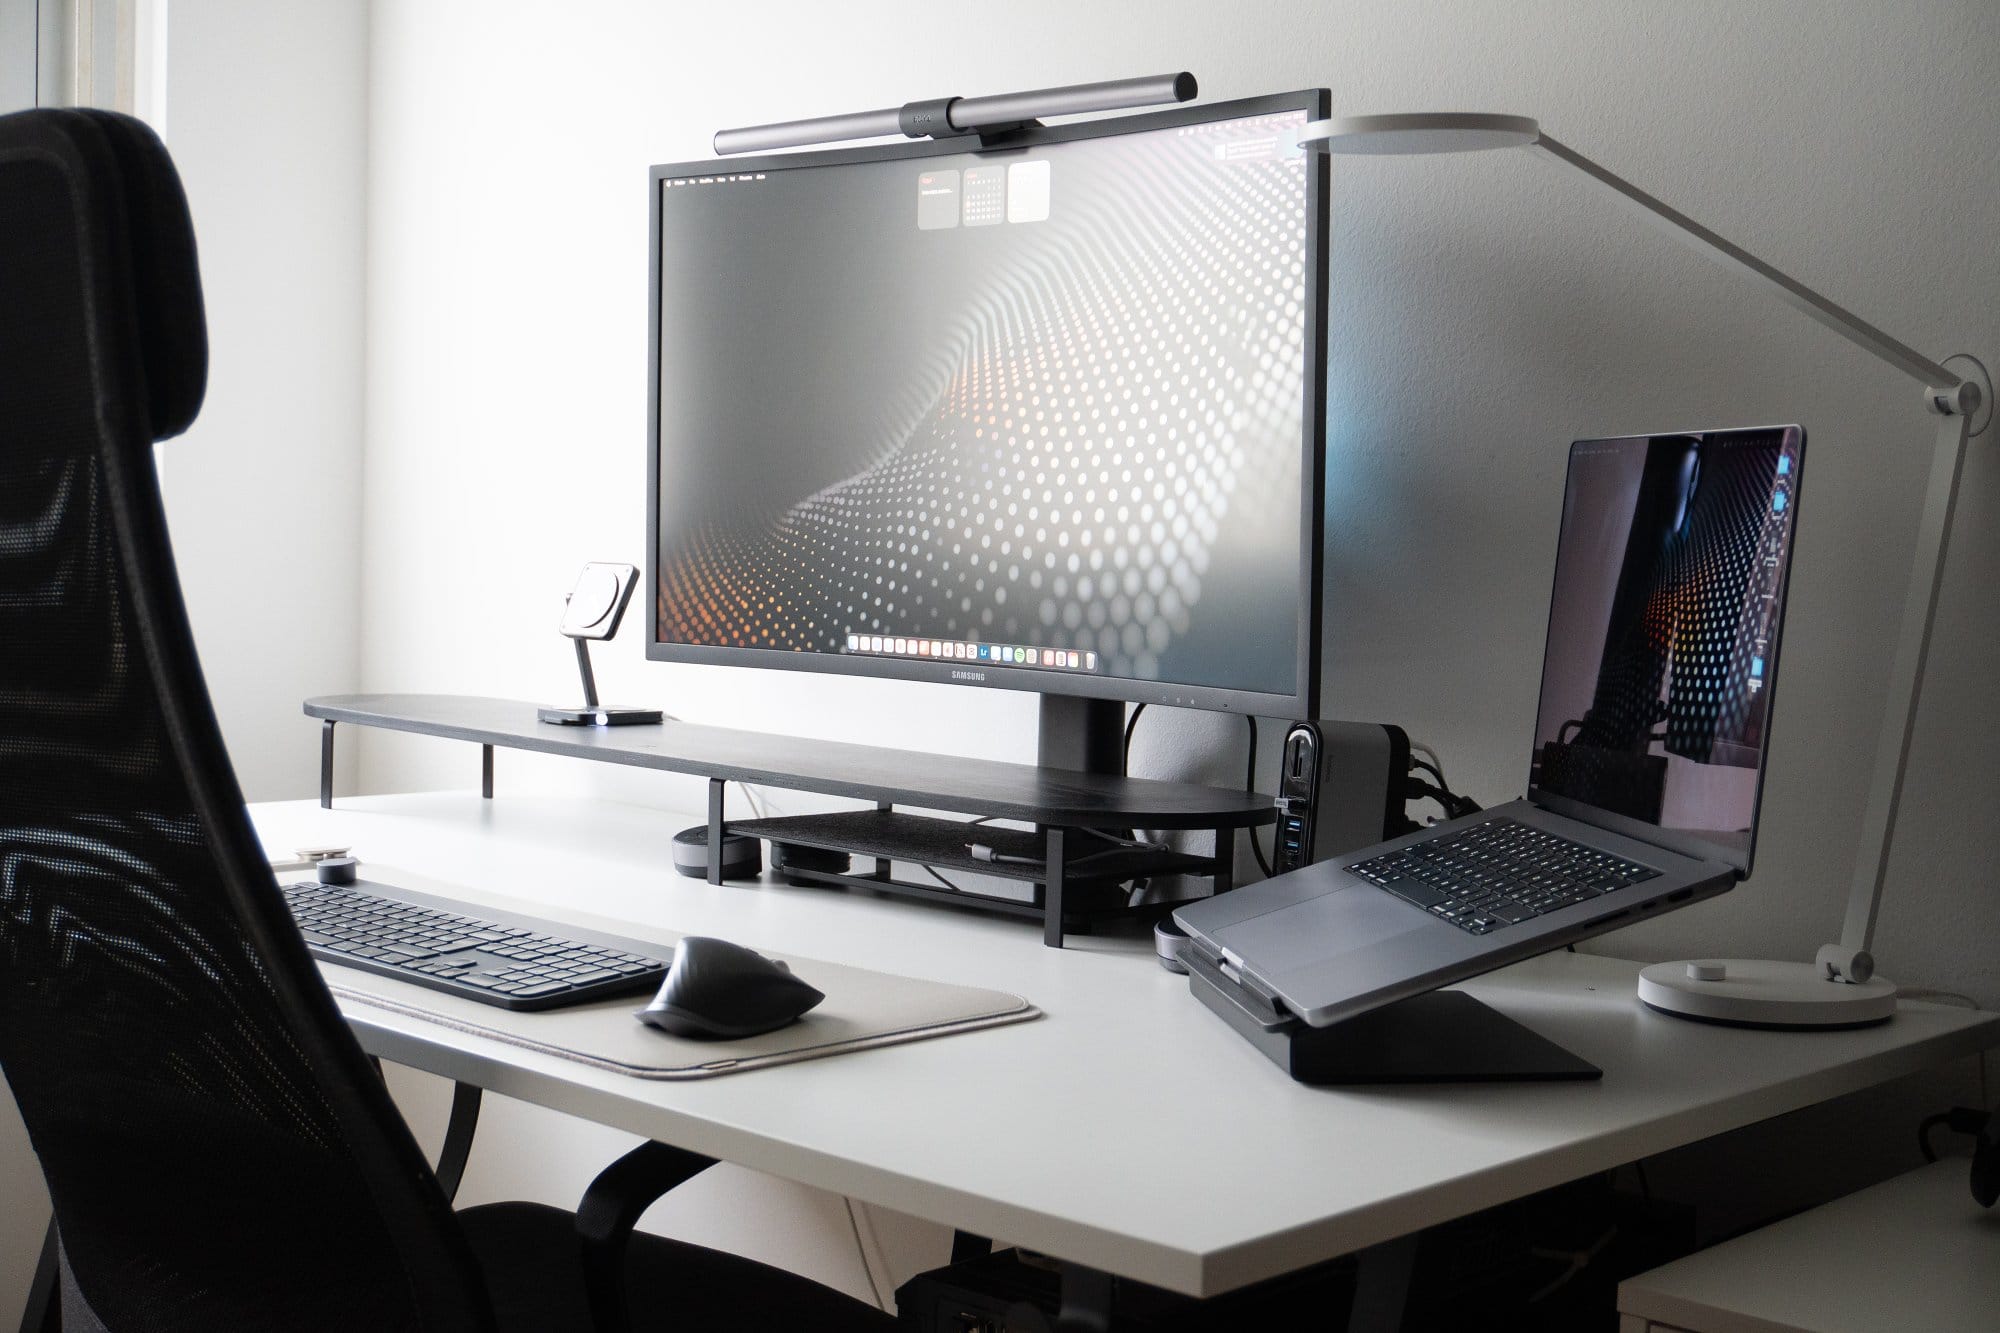 A sleek home office setup with a monitor, a laptop on a riser, a keyboard, a mouse on a mat, and a desk lamp, arranged on a white desk with a black chair